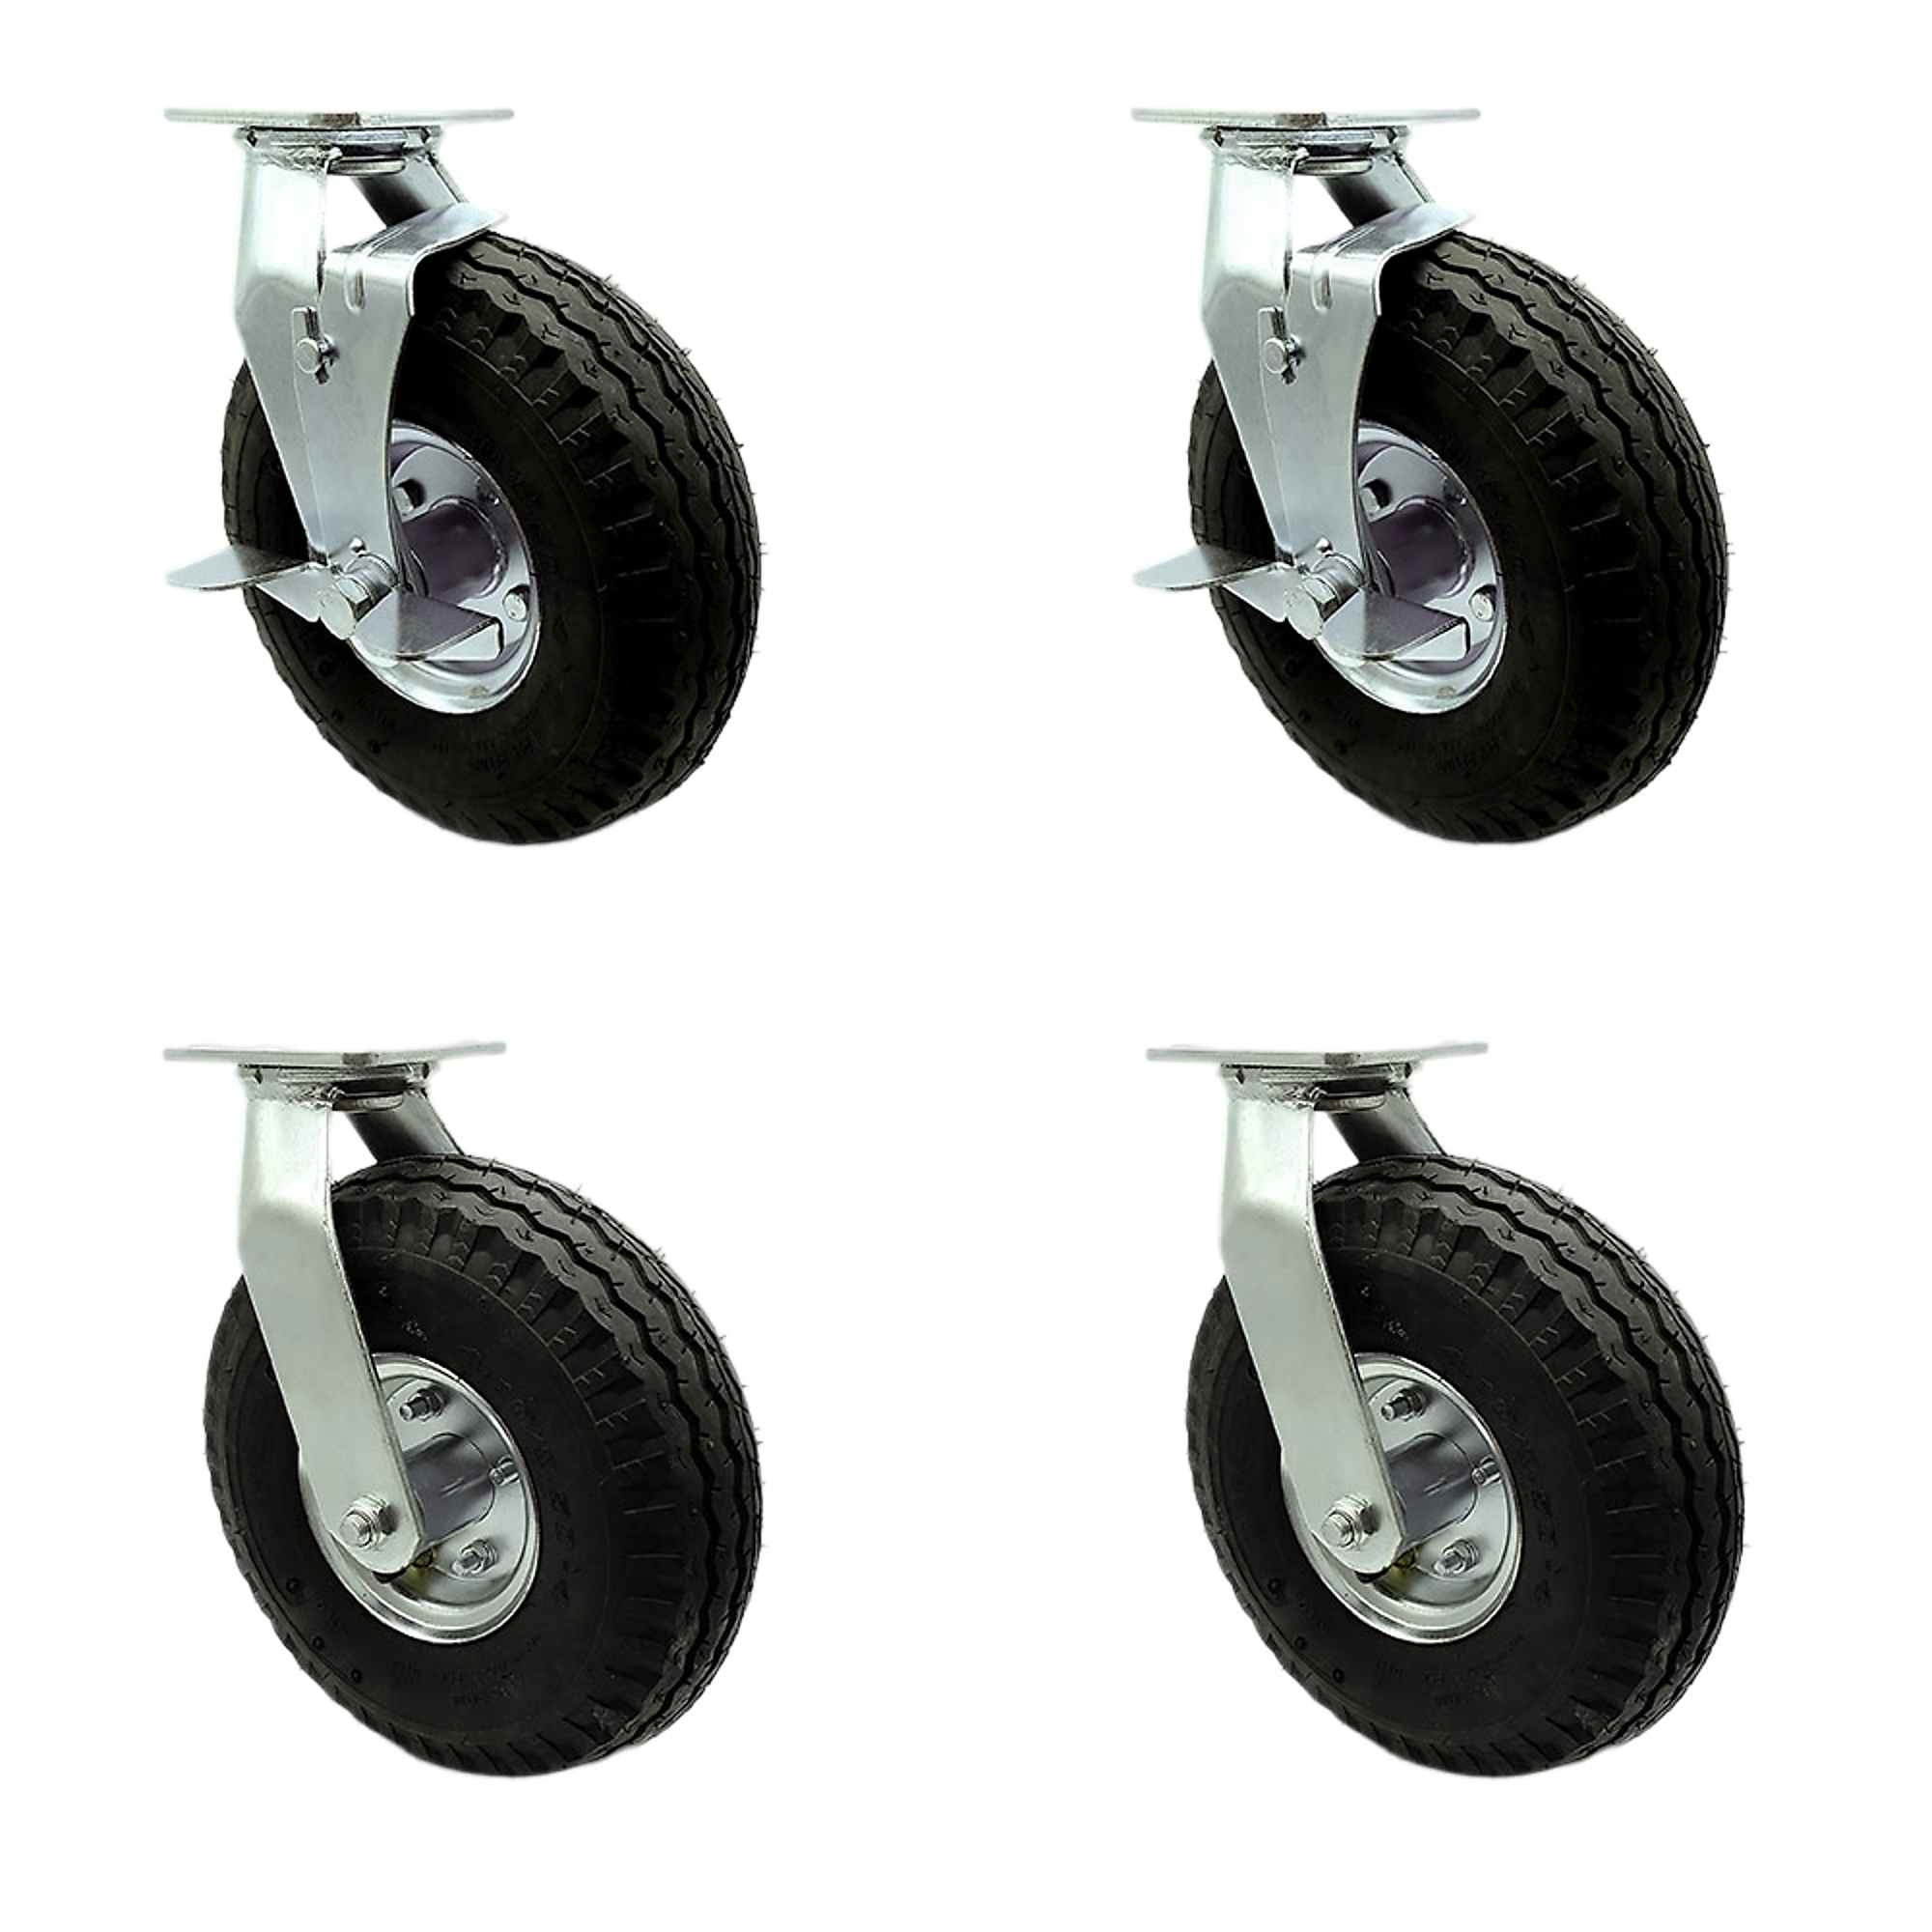 Service Caster, 10Inch x 3 1/2Inch Plate Casters, Wheel Diameter 10 in, Caster Type Swivel, Package (qty.) 4, Model SCC-100S3504-PNB-TLB-BSL-2-BSL-2